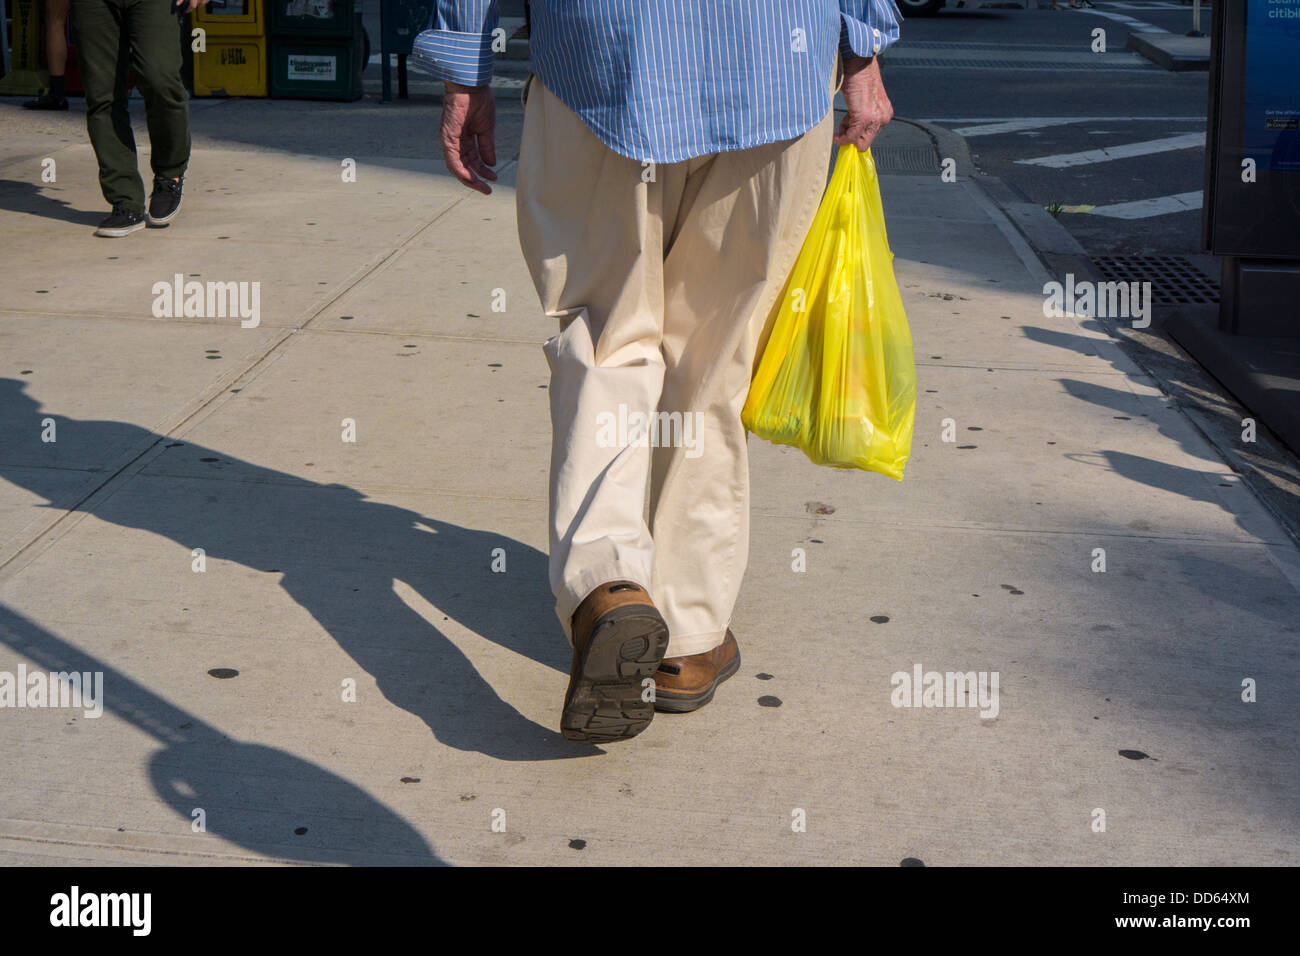 A shopper leaves a supermarket with a plastic bag holding his groceries Stock Photo